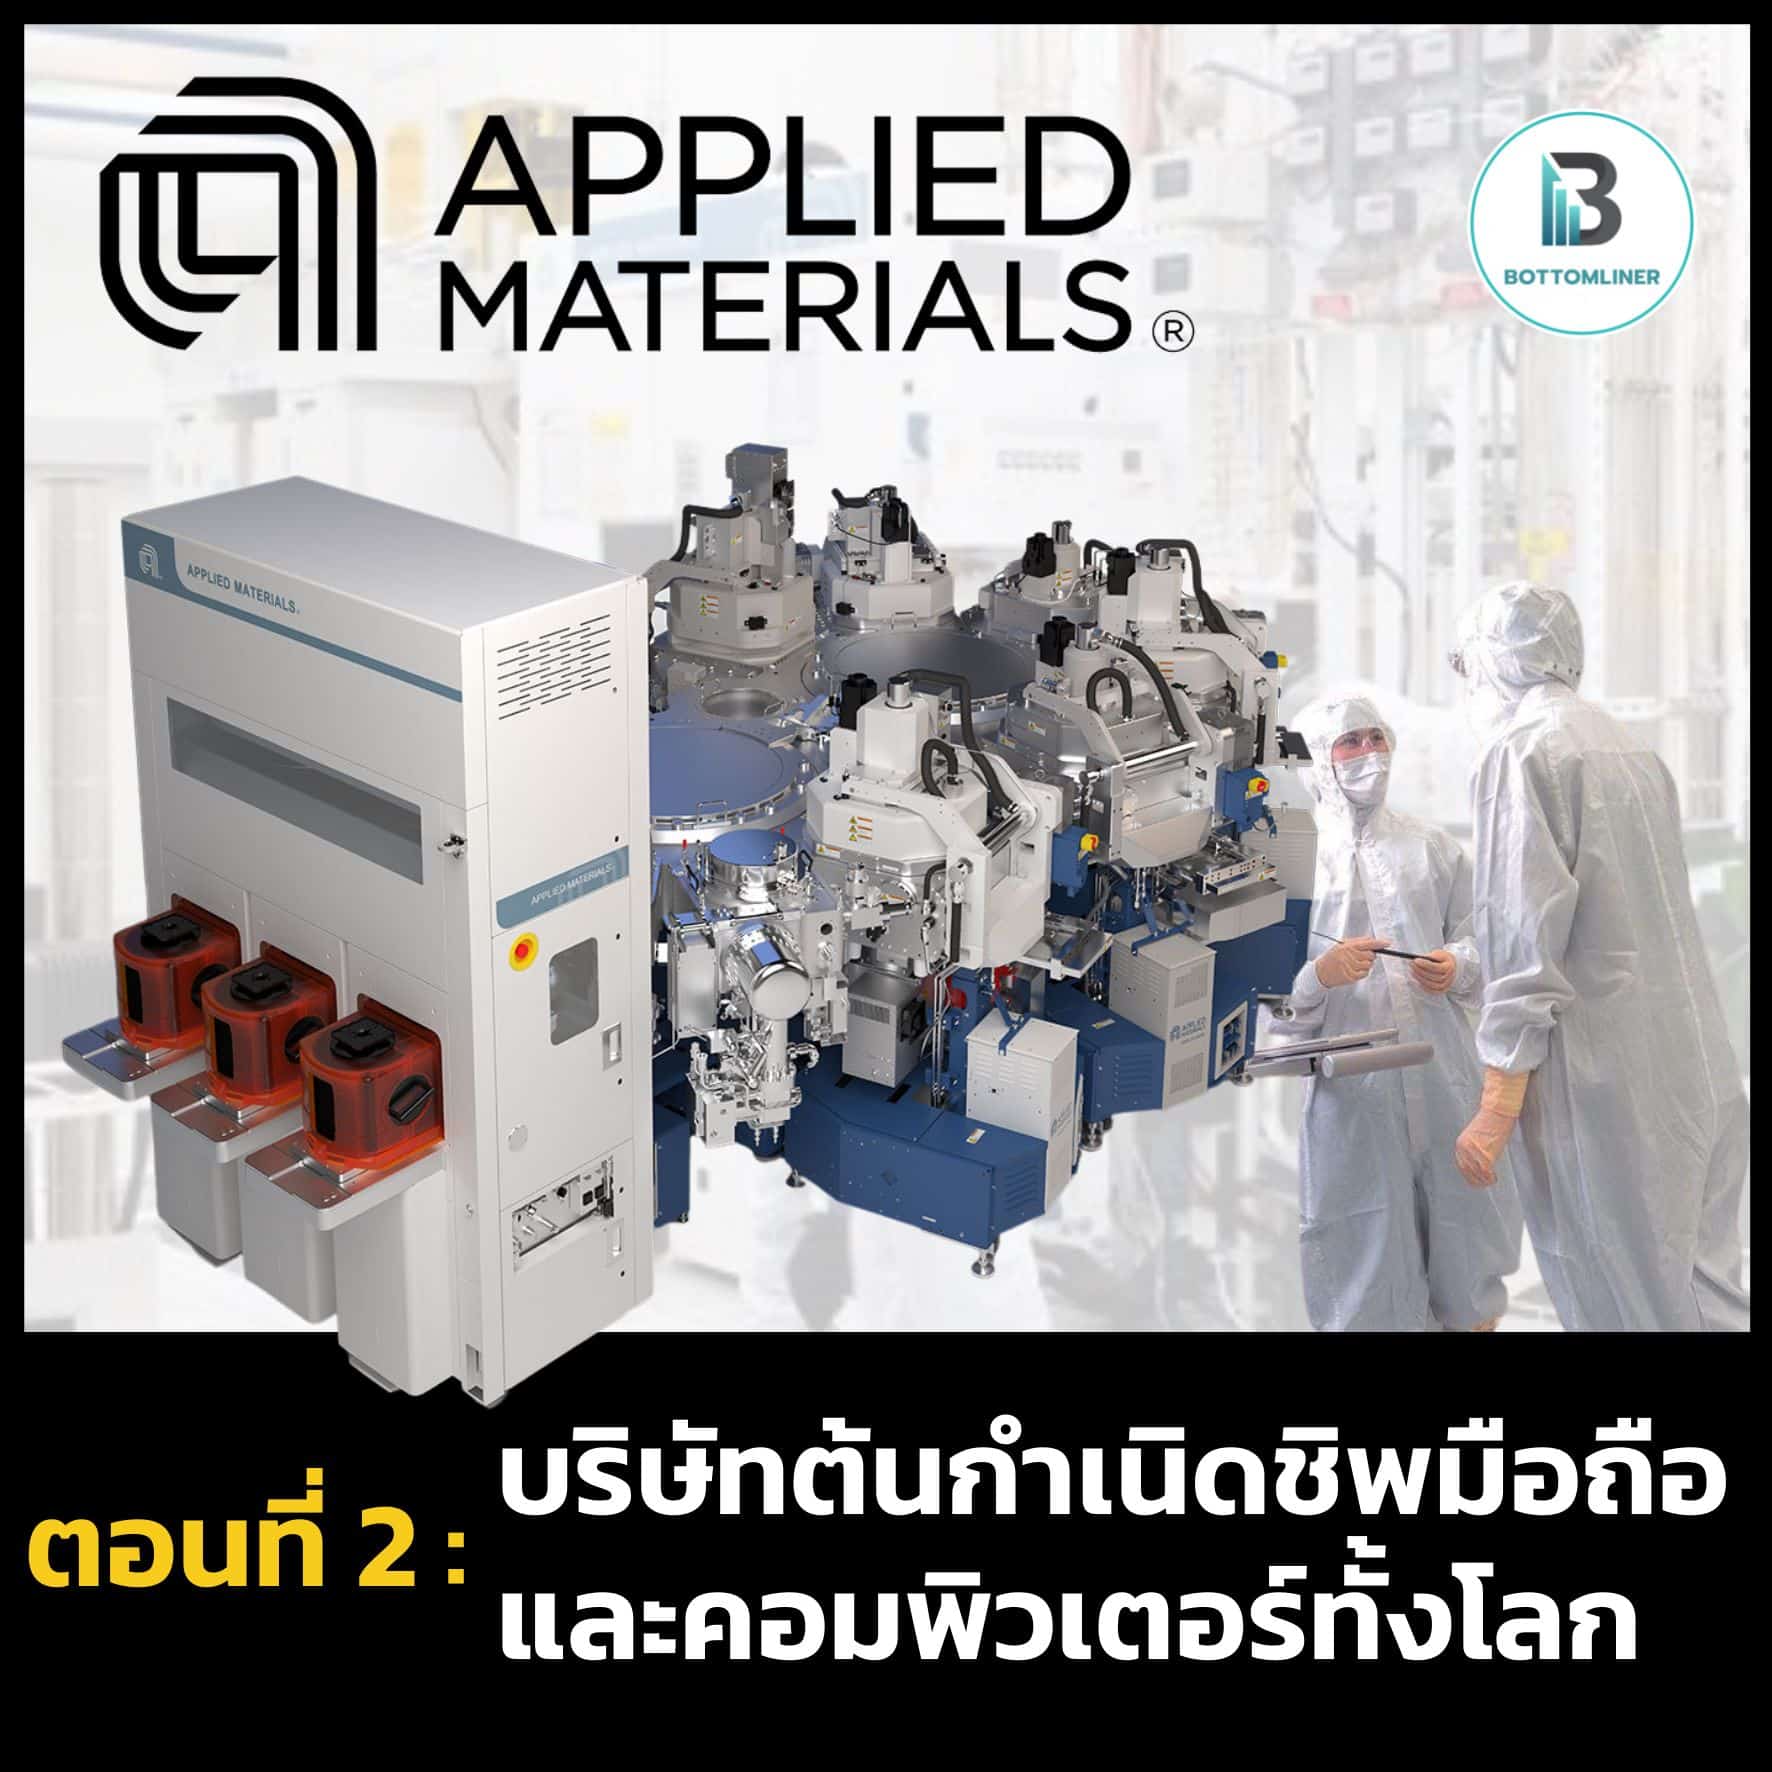 Semiconductor the Series 3 ทหารเสือแห่งวงการเครื่องจักร EP.2: Applied Materials